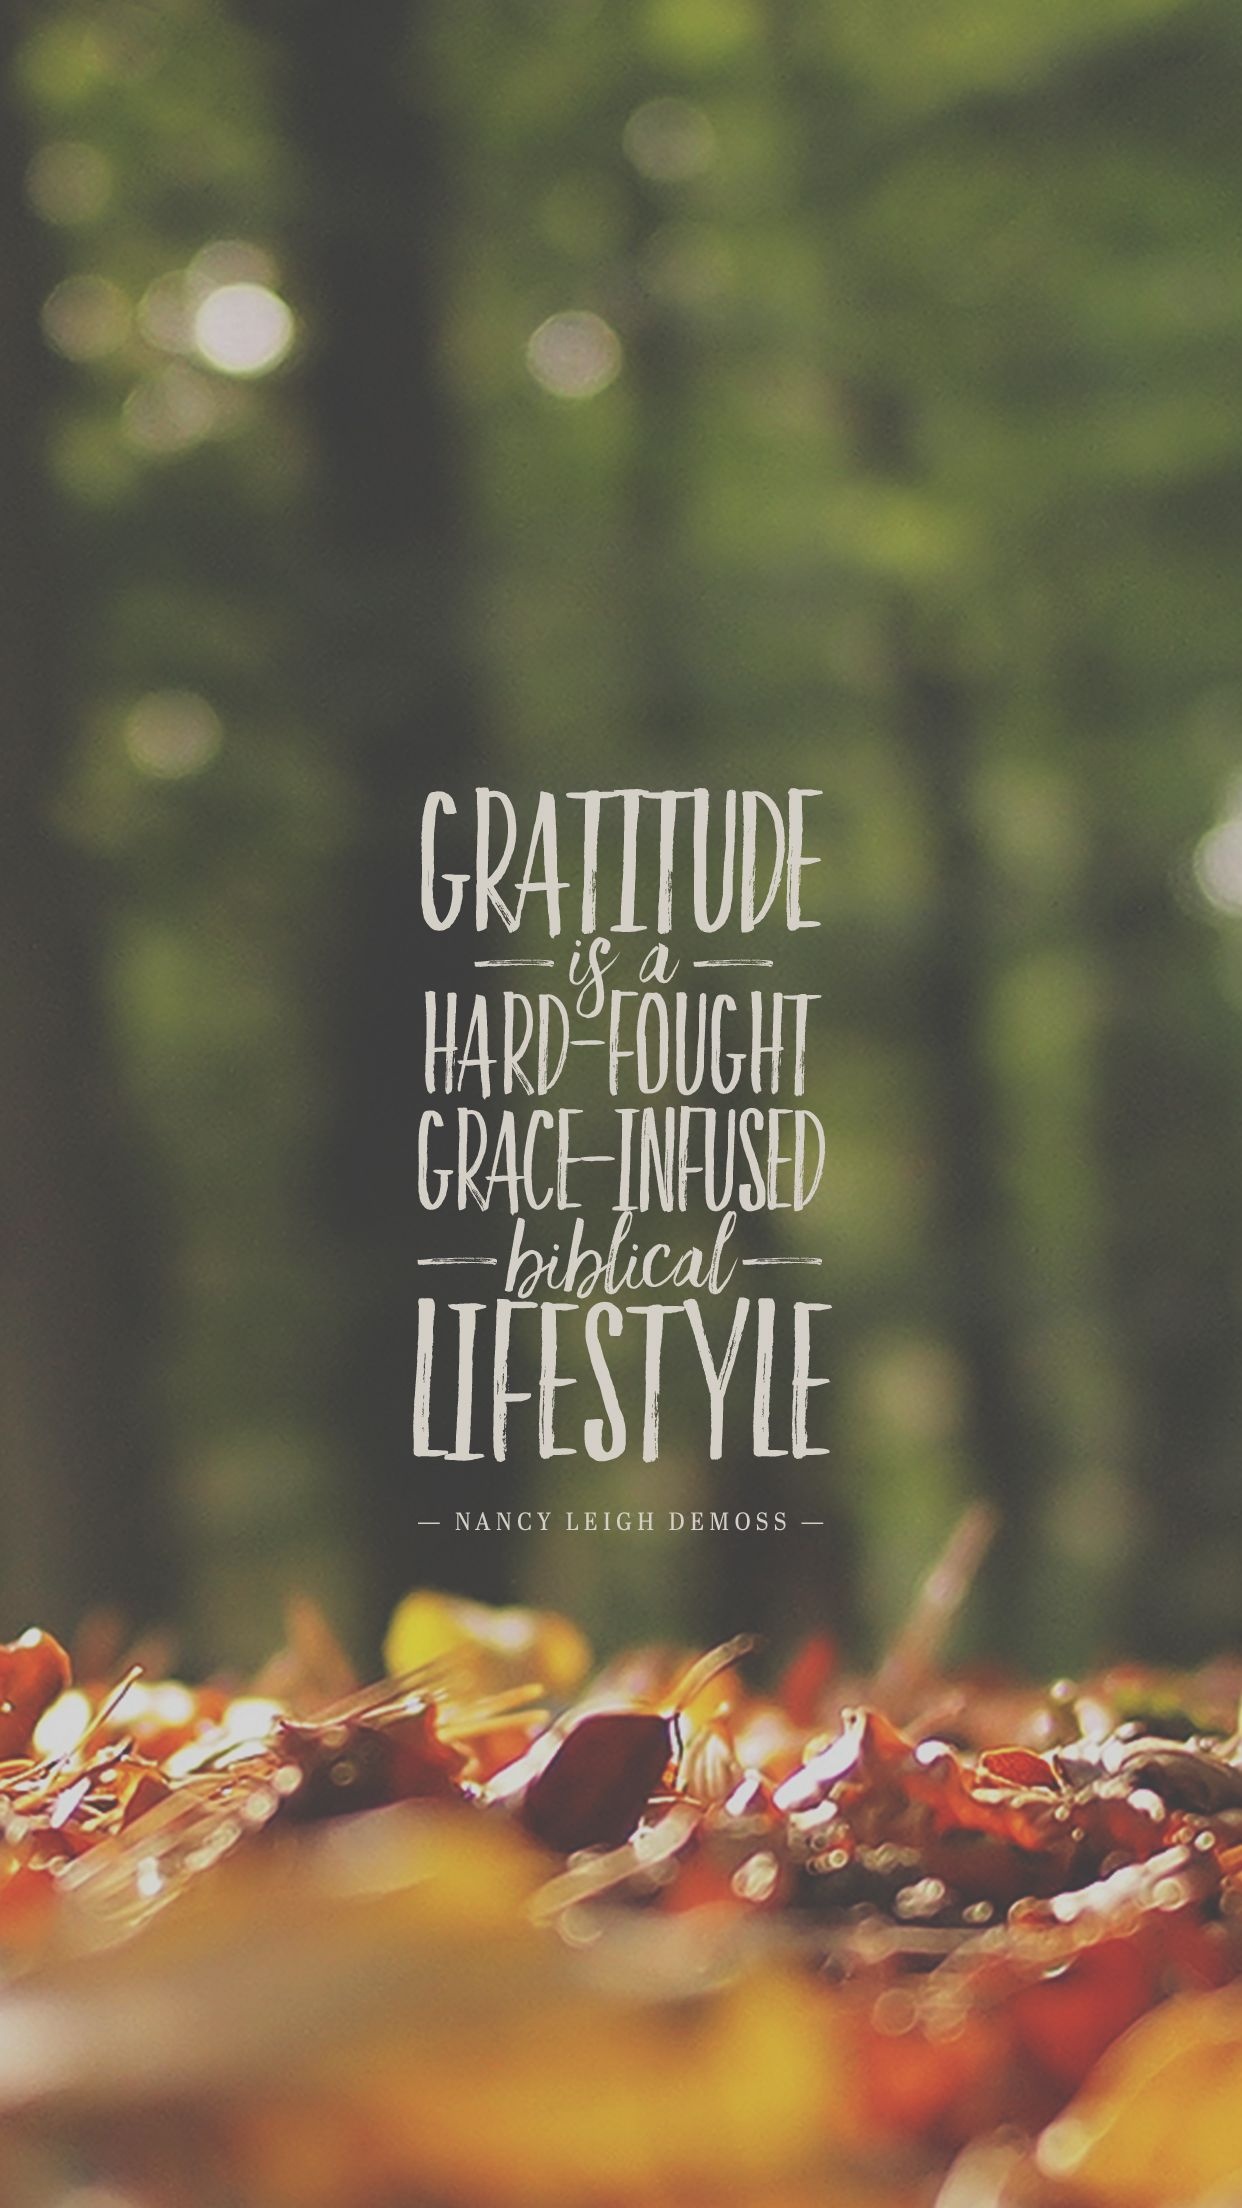 Gratitude: A hard-fought, grace-infused, biblical lifestyle, Nancy Leigh DeMoss, A Christian radio host and author, Revive Our Hearts. 1250x2210 HD Background.